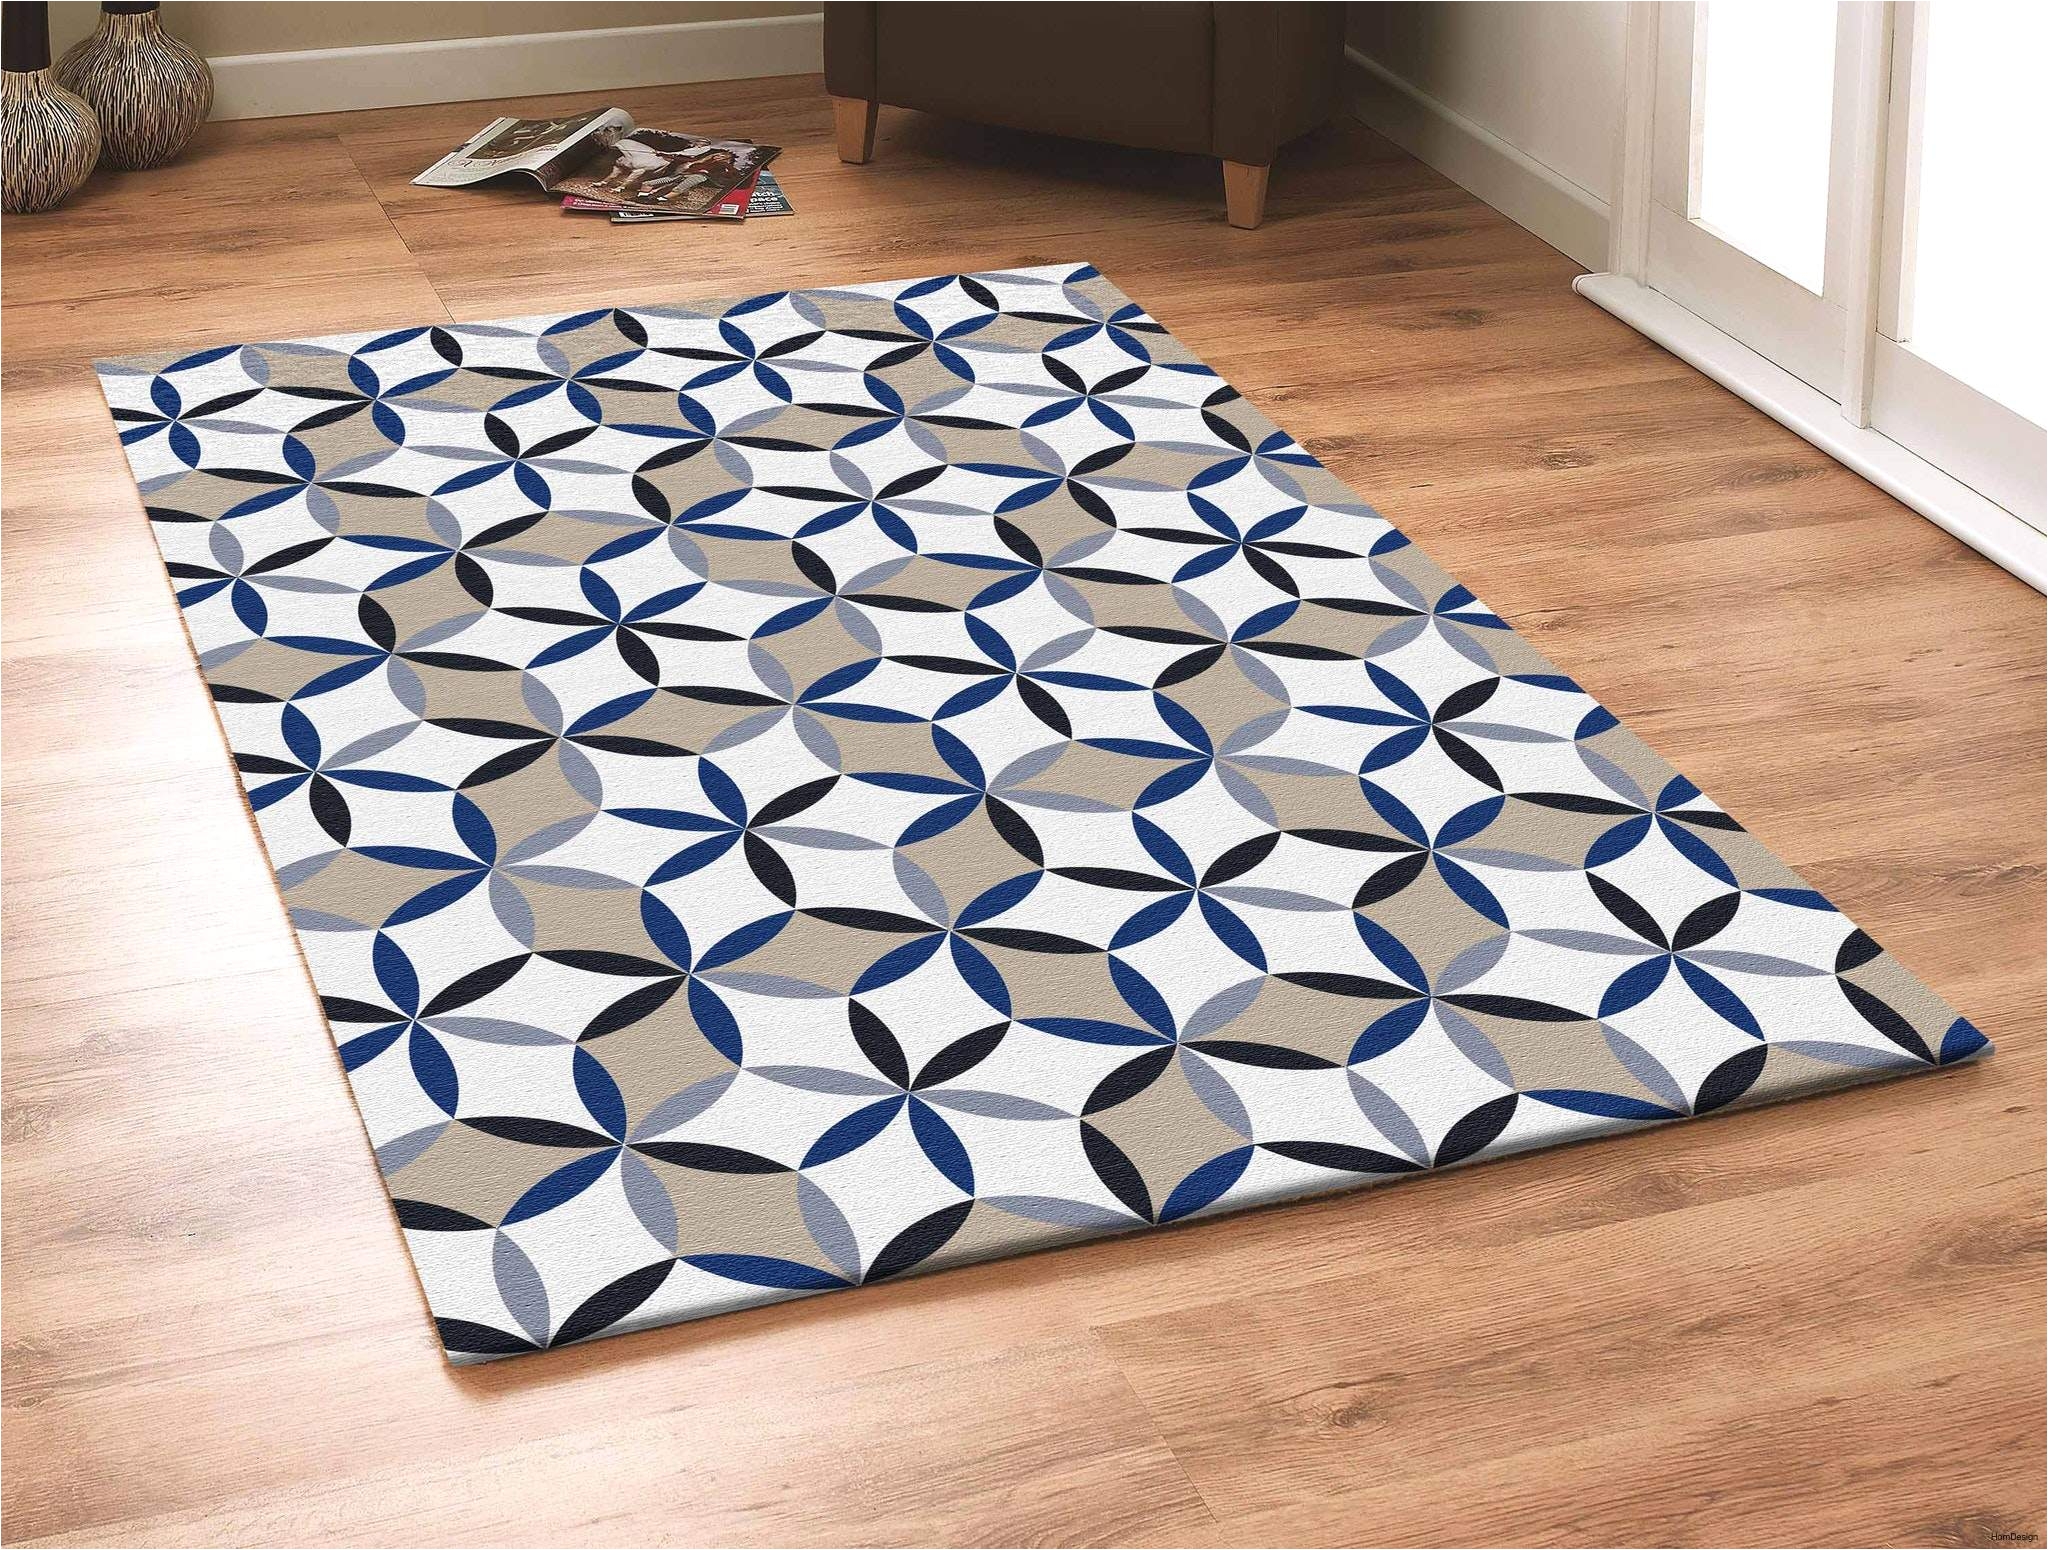 black round area rugs new rugged new cheap area rugs blue rug as gold and white